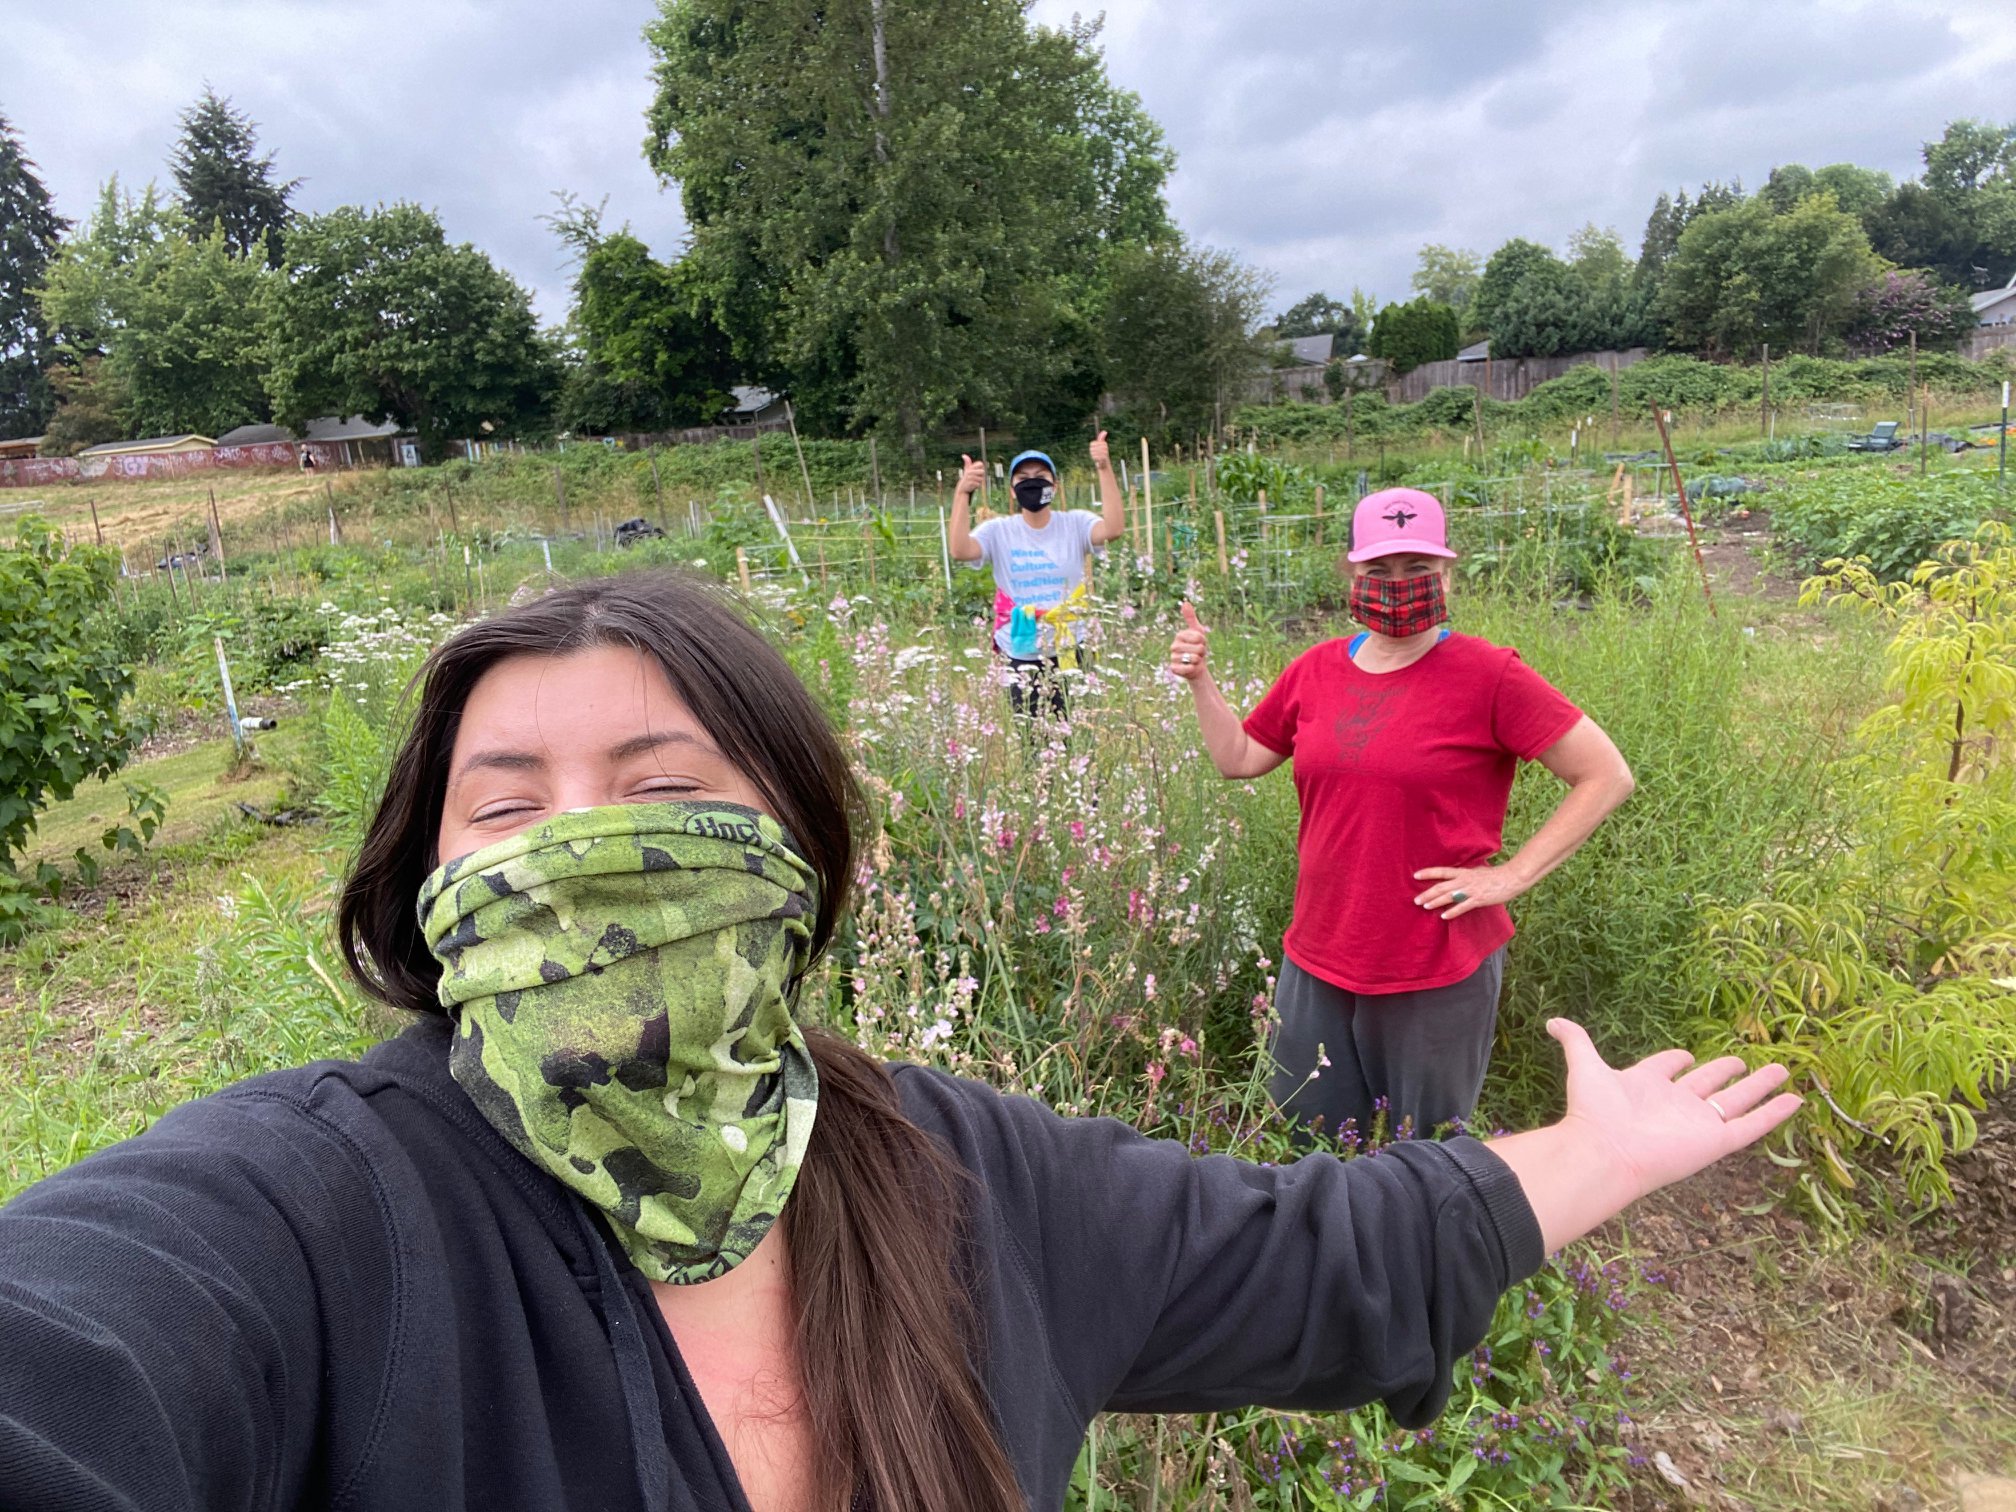 A self-portrait of a woman with long dark hair and wearing a green pattern mask. She is gesturing toward two other women working with her in a community garden.